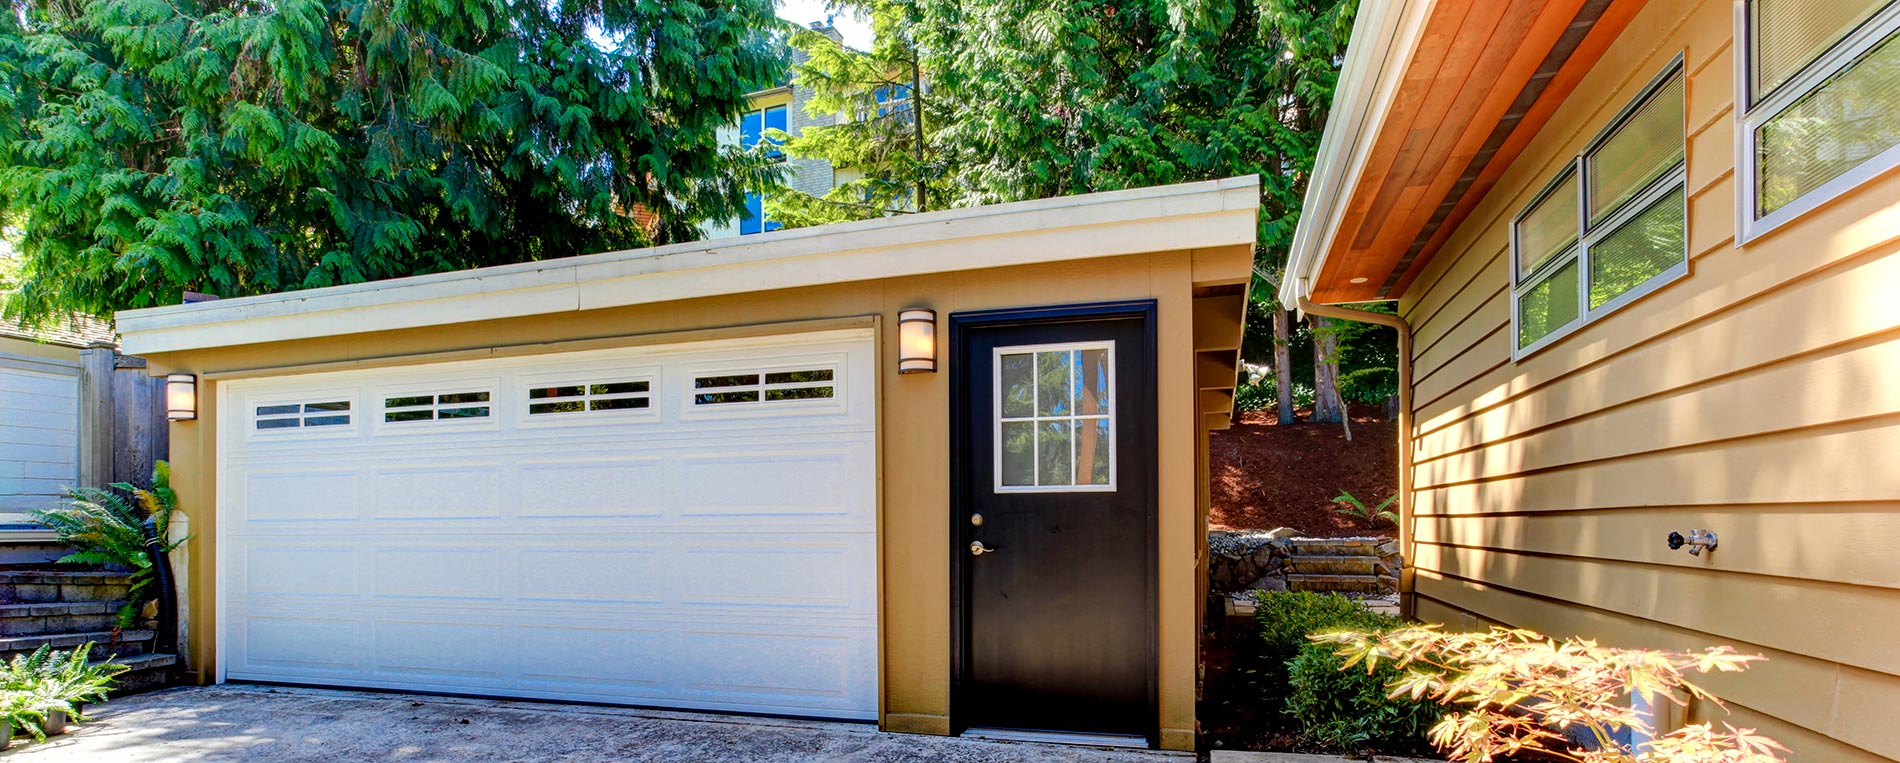 Things To Consider When Getting a New Garage Door